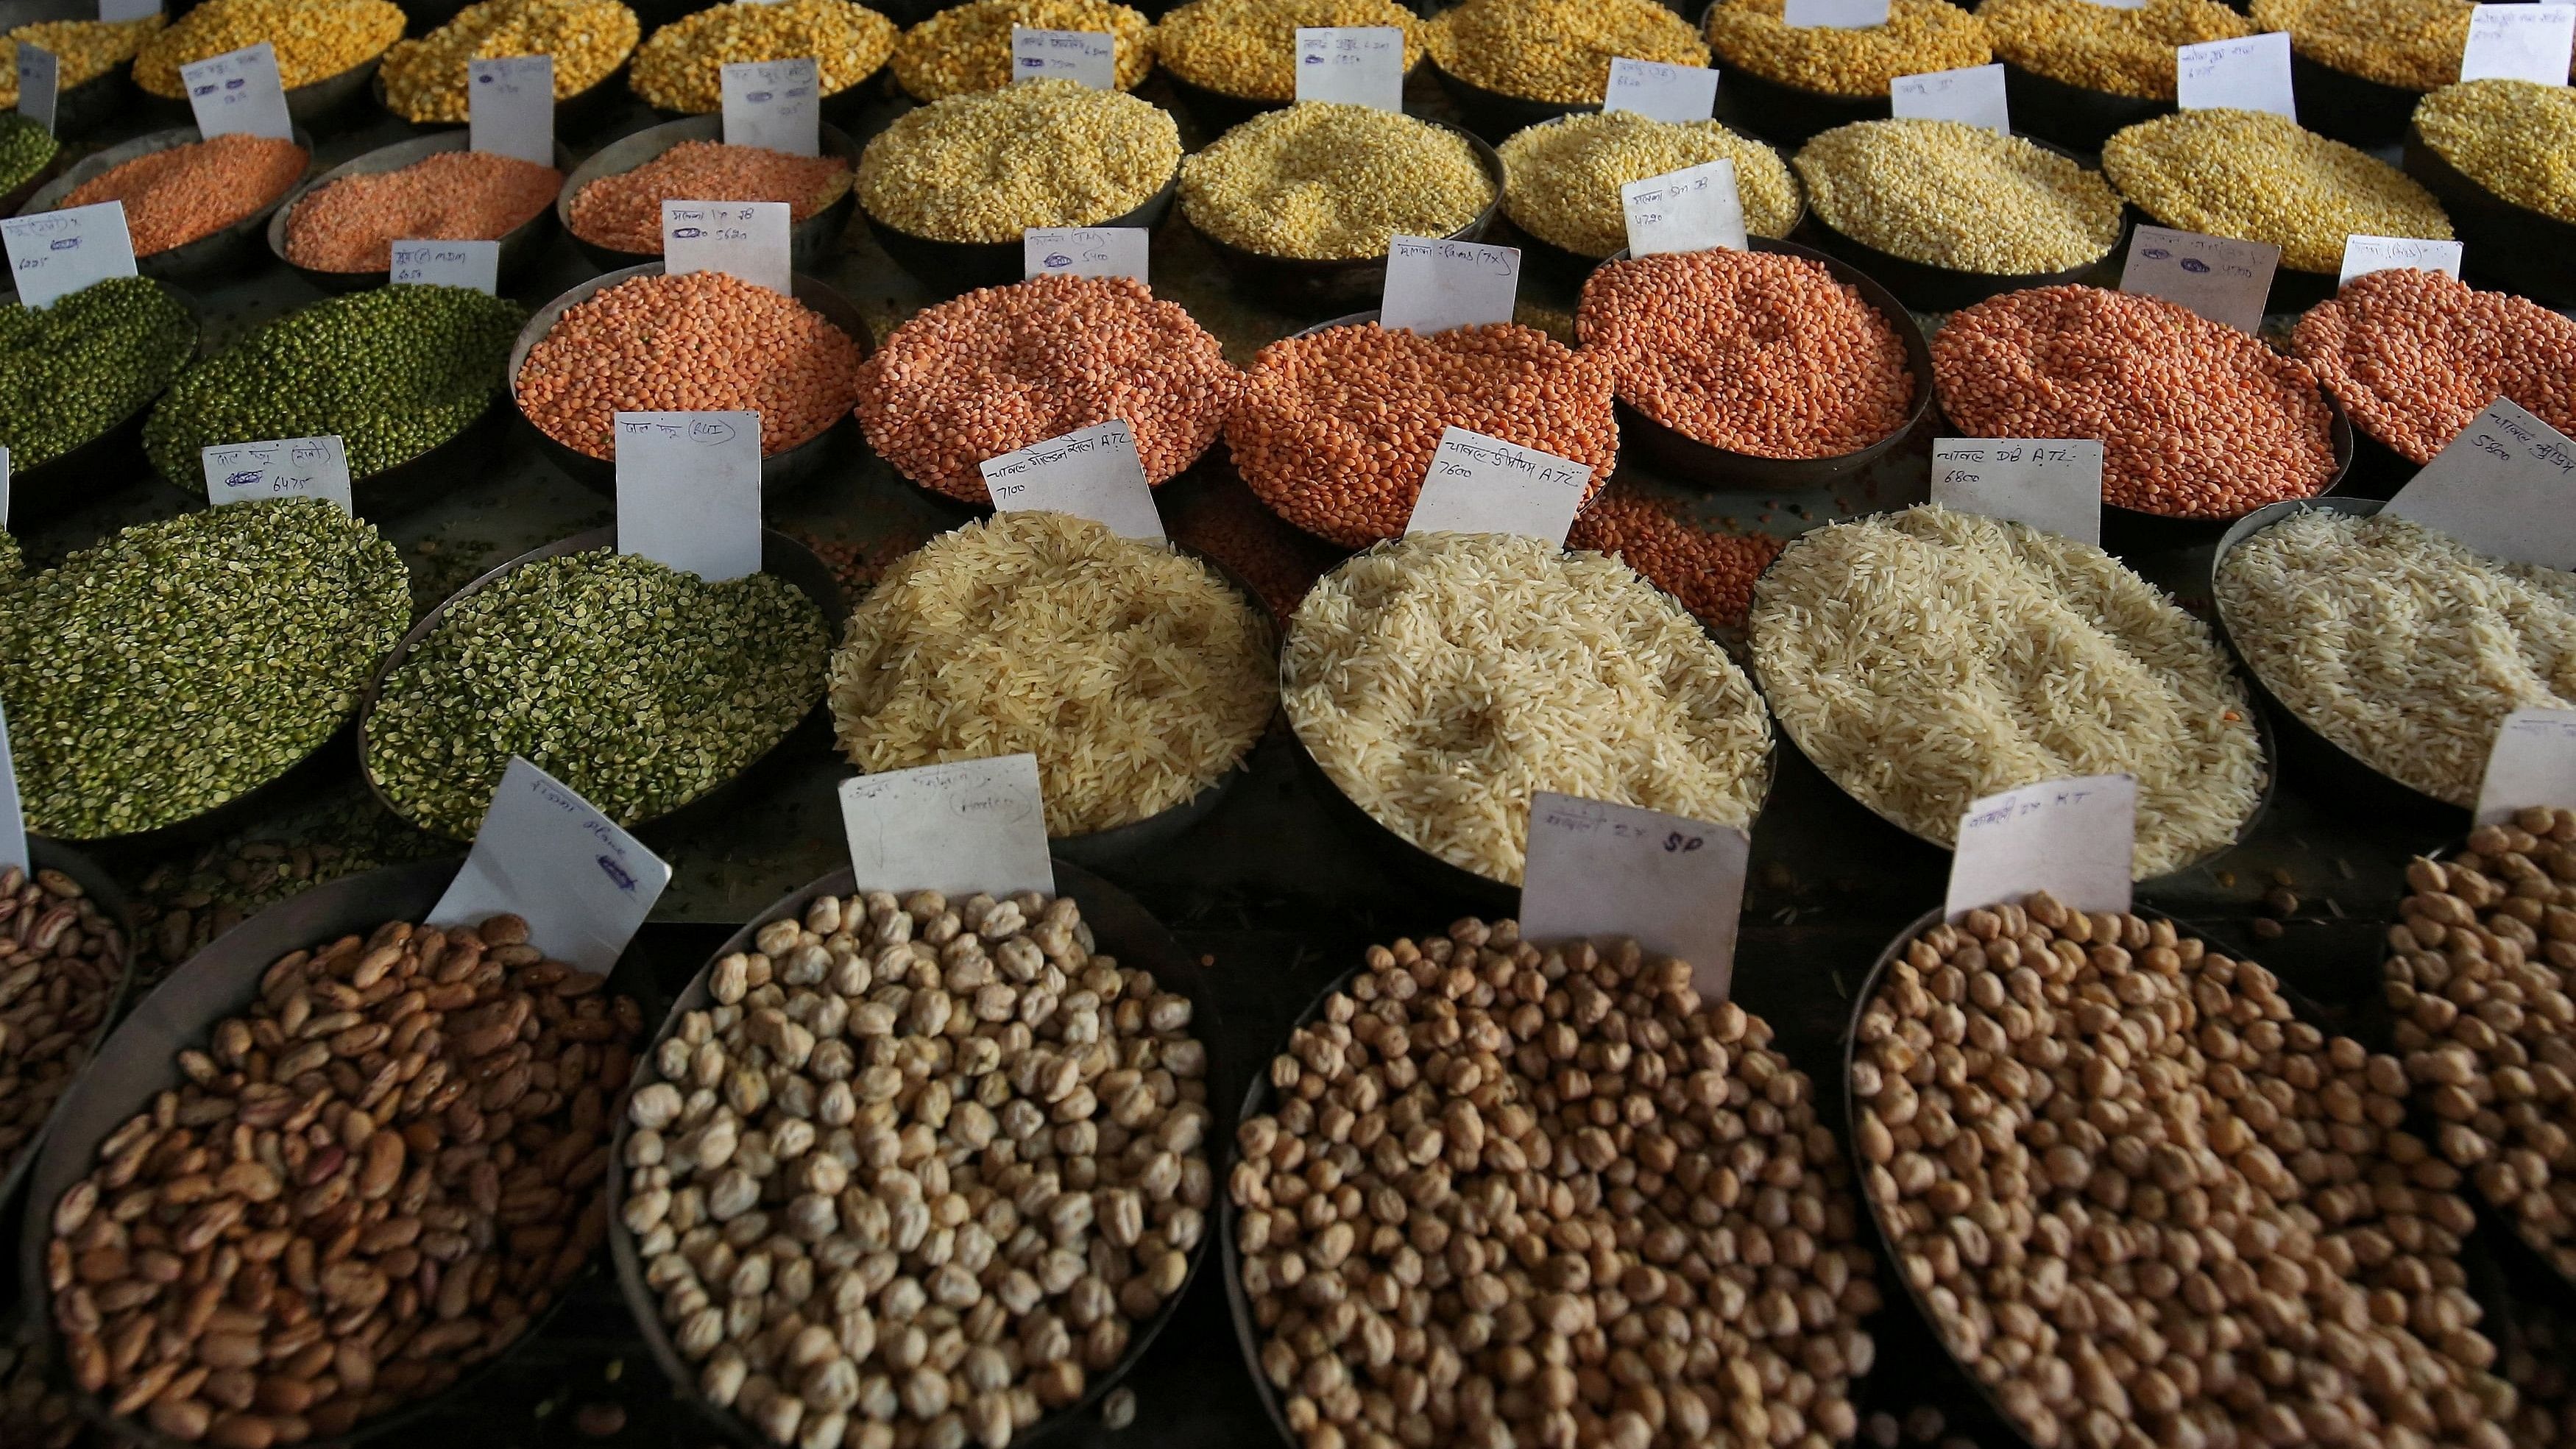 <div class="paragraphs"><p>Price tags are seen on the samples of rice and lentils that are kept on display for sale at a wholesale market in the old quarters of Delhi.</p></div>